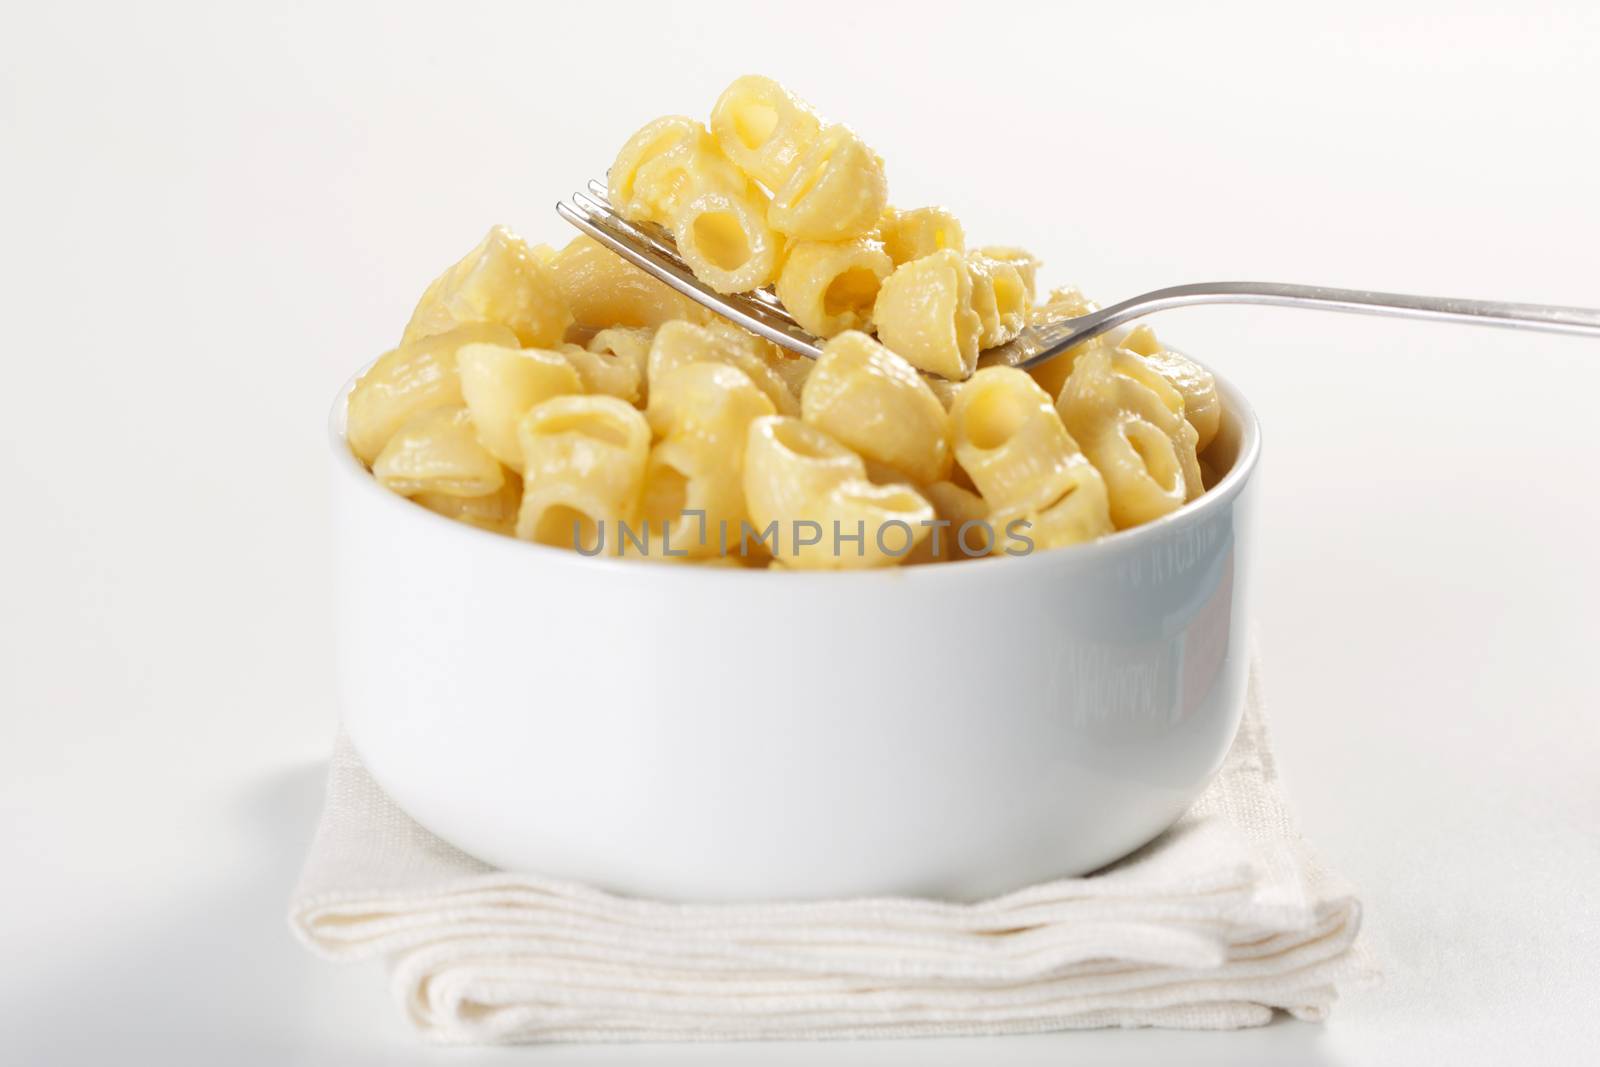 Macaroni and cheese in the bowl